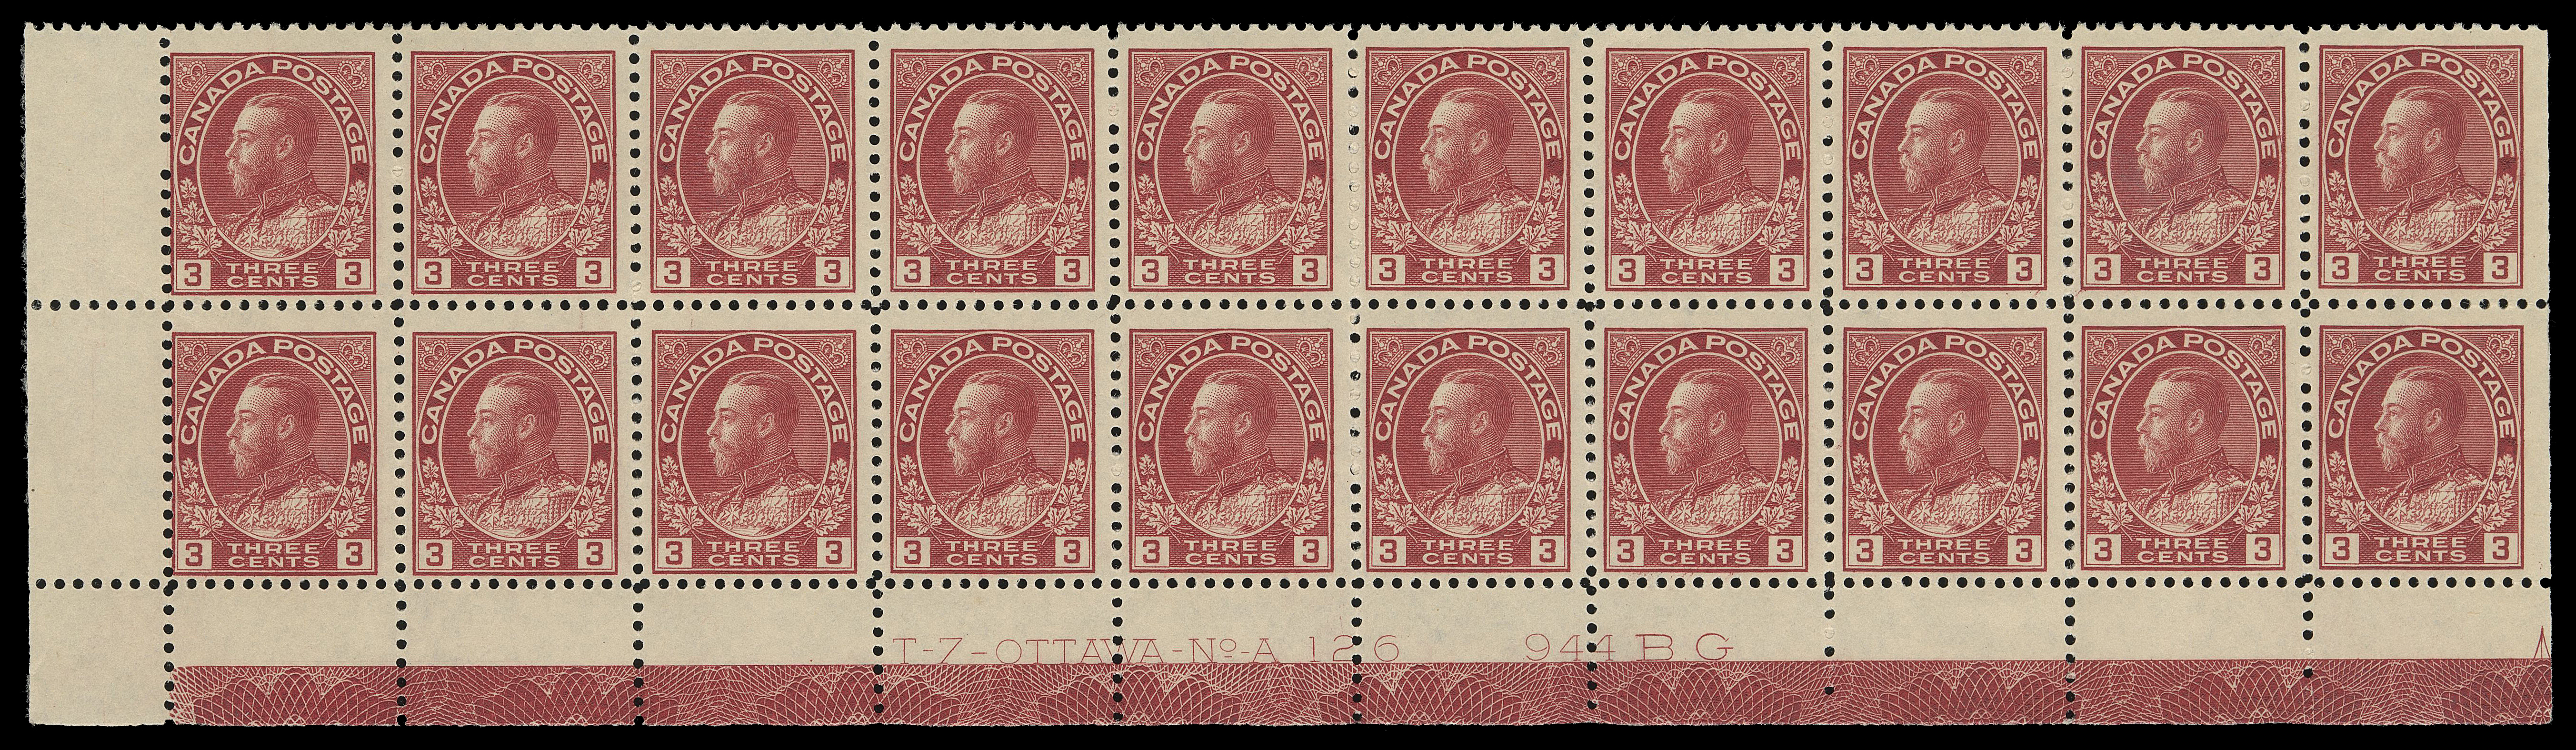 ADMIRAL STAMPS  109,Lower left Plate 126 block of twenty with plate imprint and full strength Type D lathework, six stamps in lower row NH, a very scarce intact block, F-VF LH (Unitrade cat. $970)